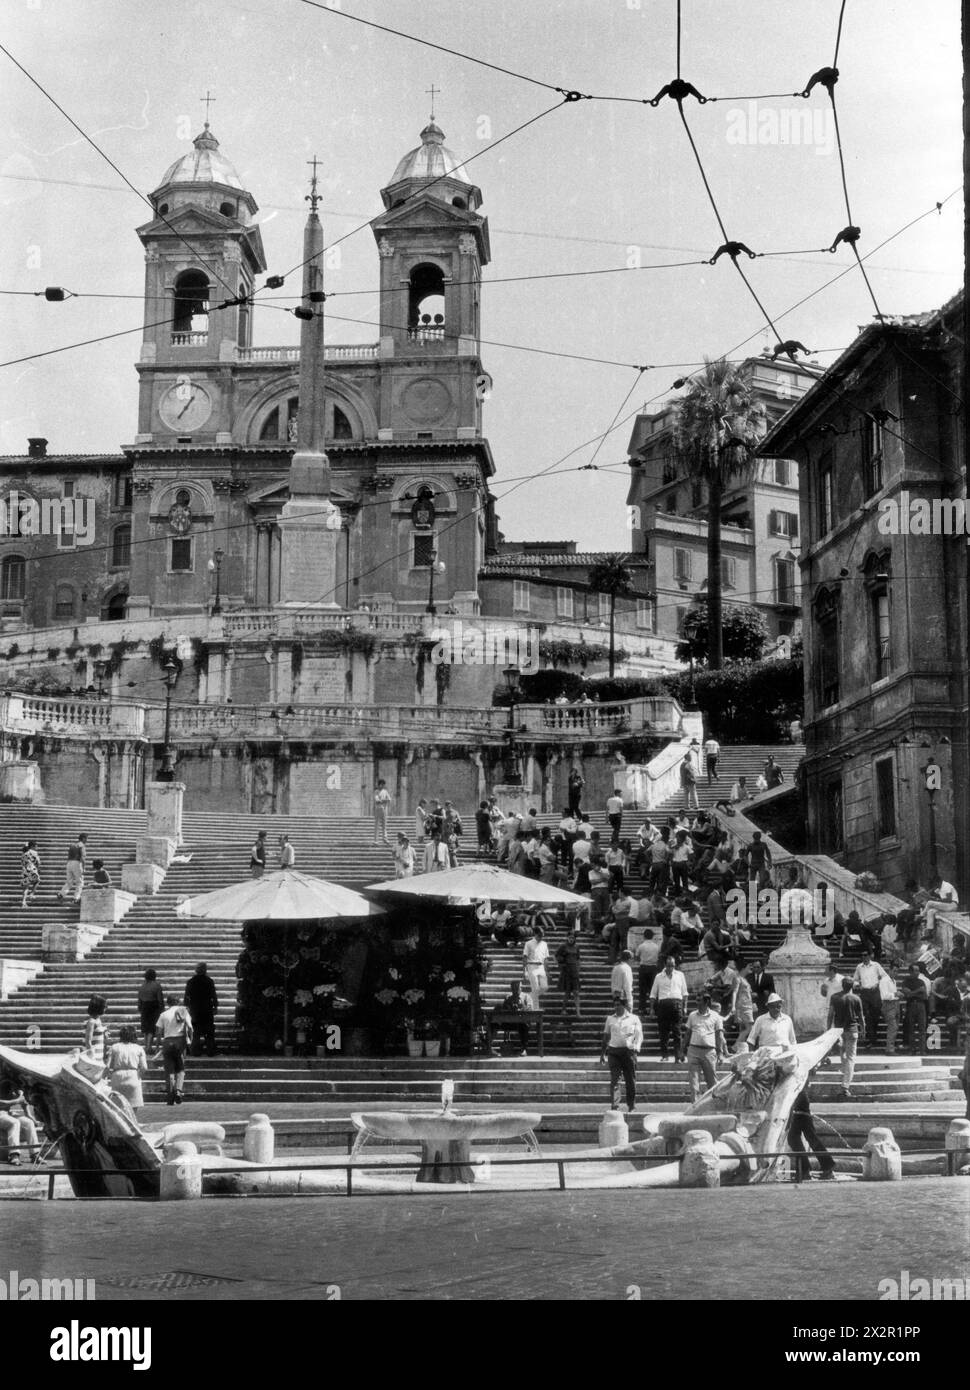 The Spanish Steps in Rome Italy 1968 Rome city 1960s historic Italy Italian tourist attraction Picture by David Bagnall Stock Photo